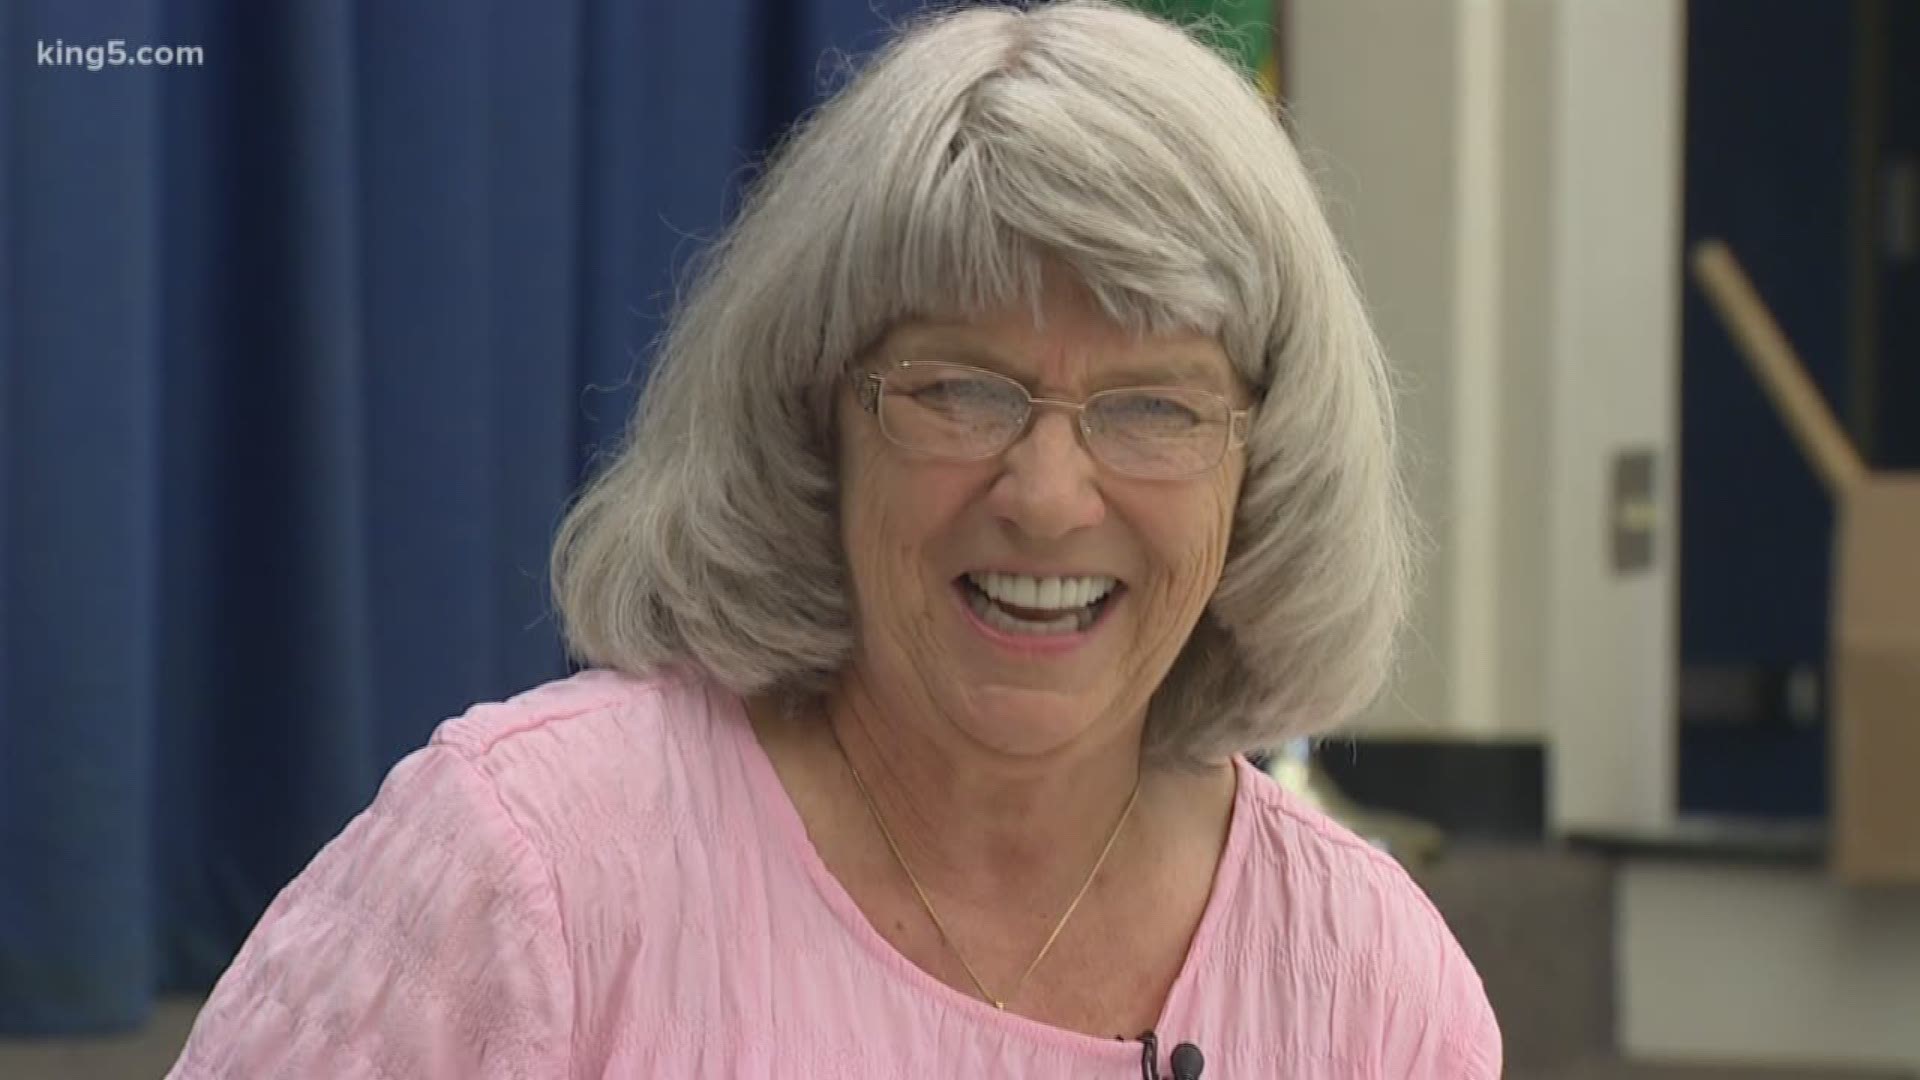 Tacoma teacher Lin Riggio is retiring from kindergarten after 48 years of teaching. KING 5's Drew Mikkelsen reports.